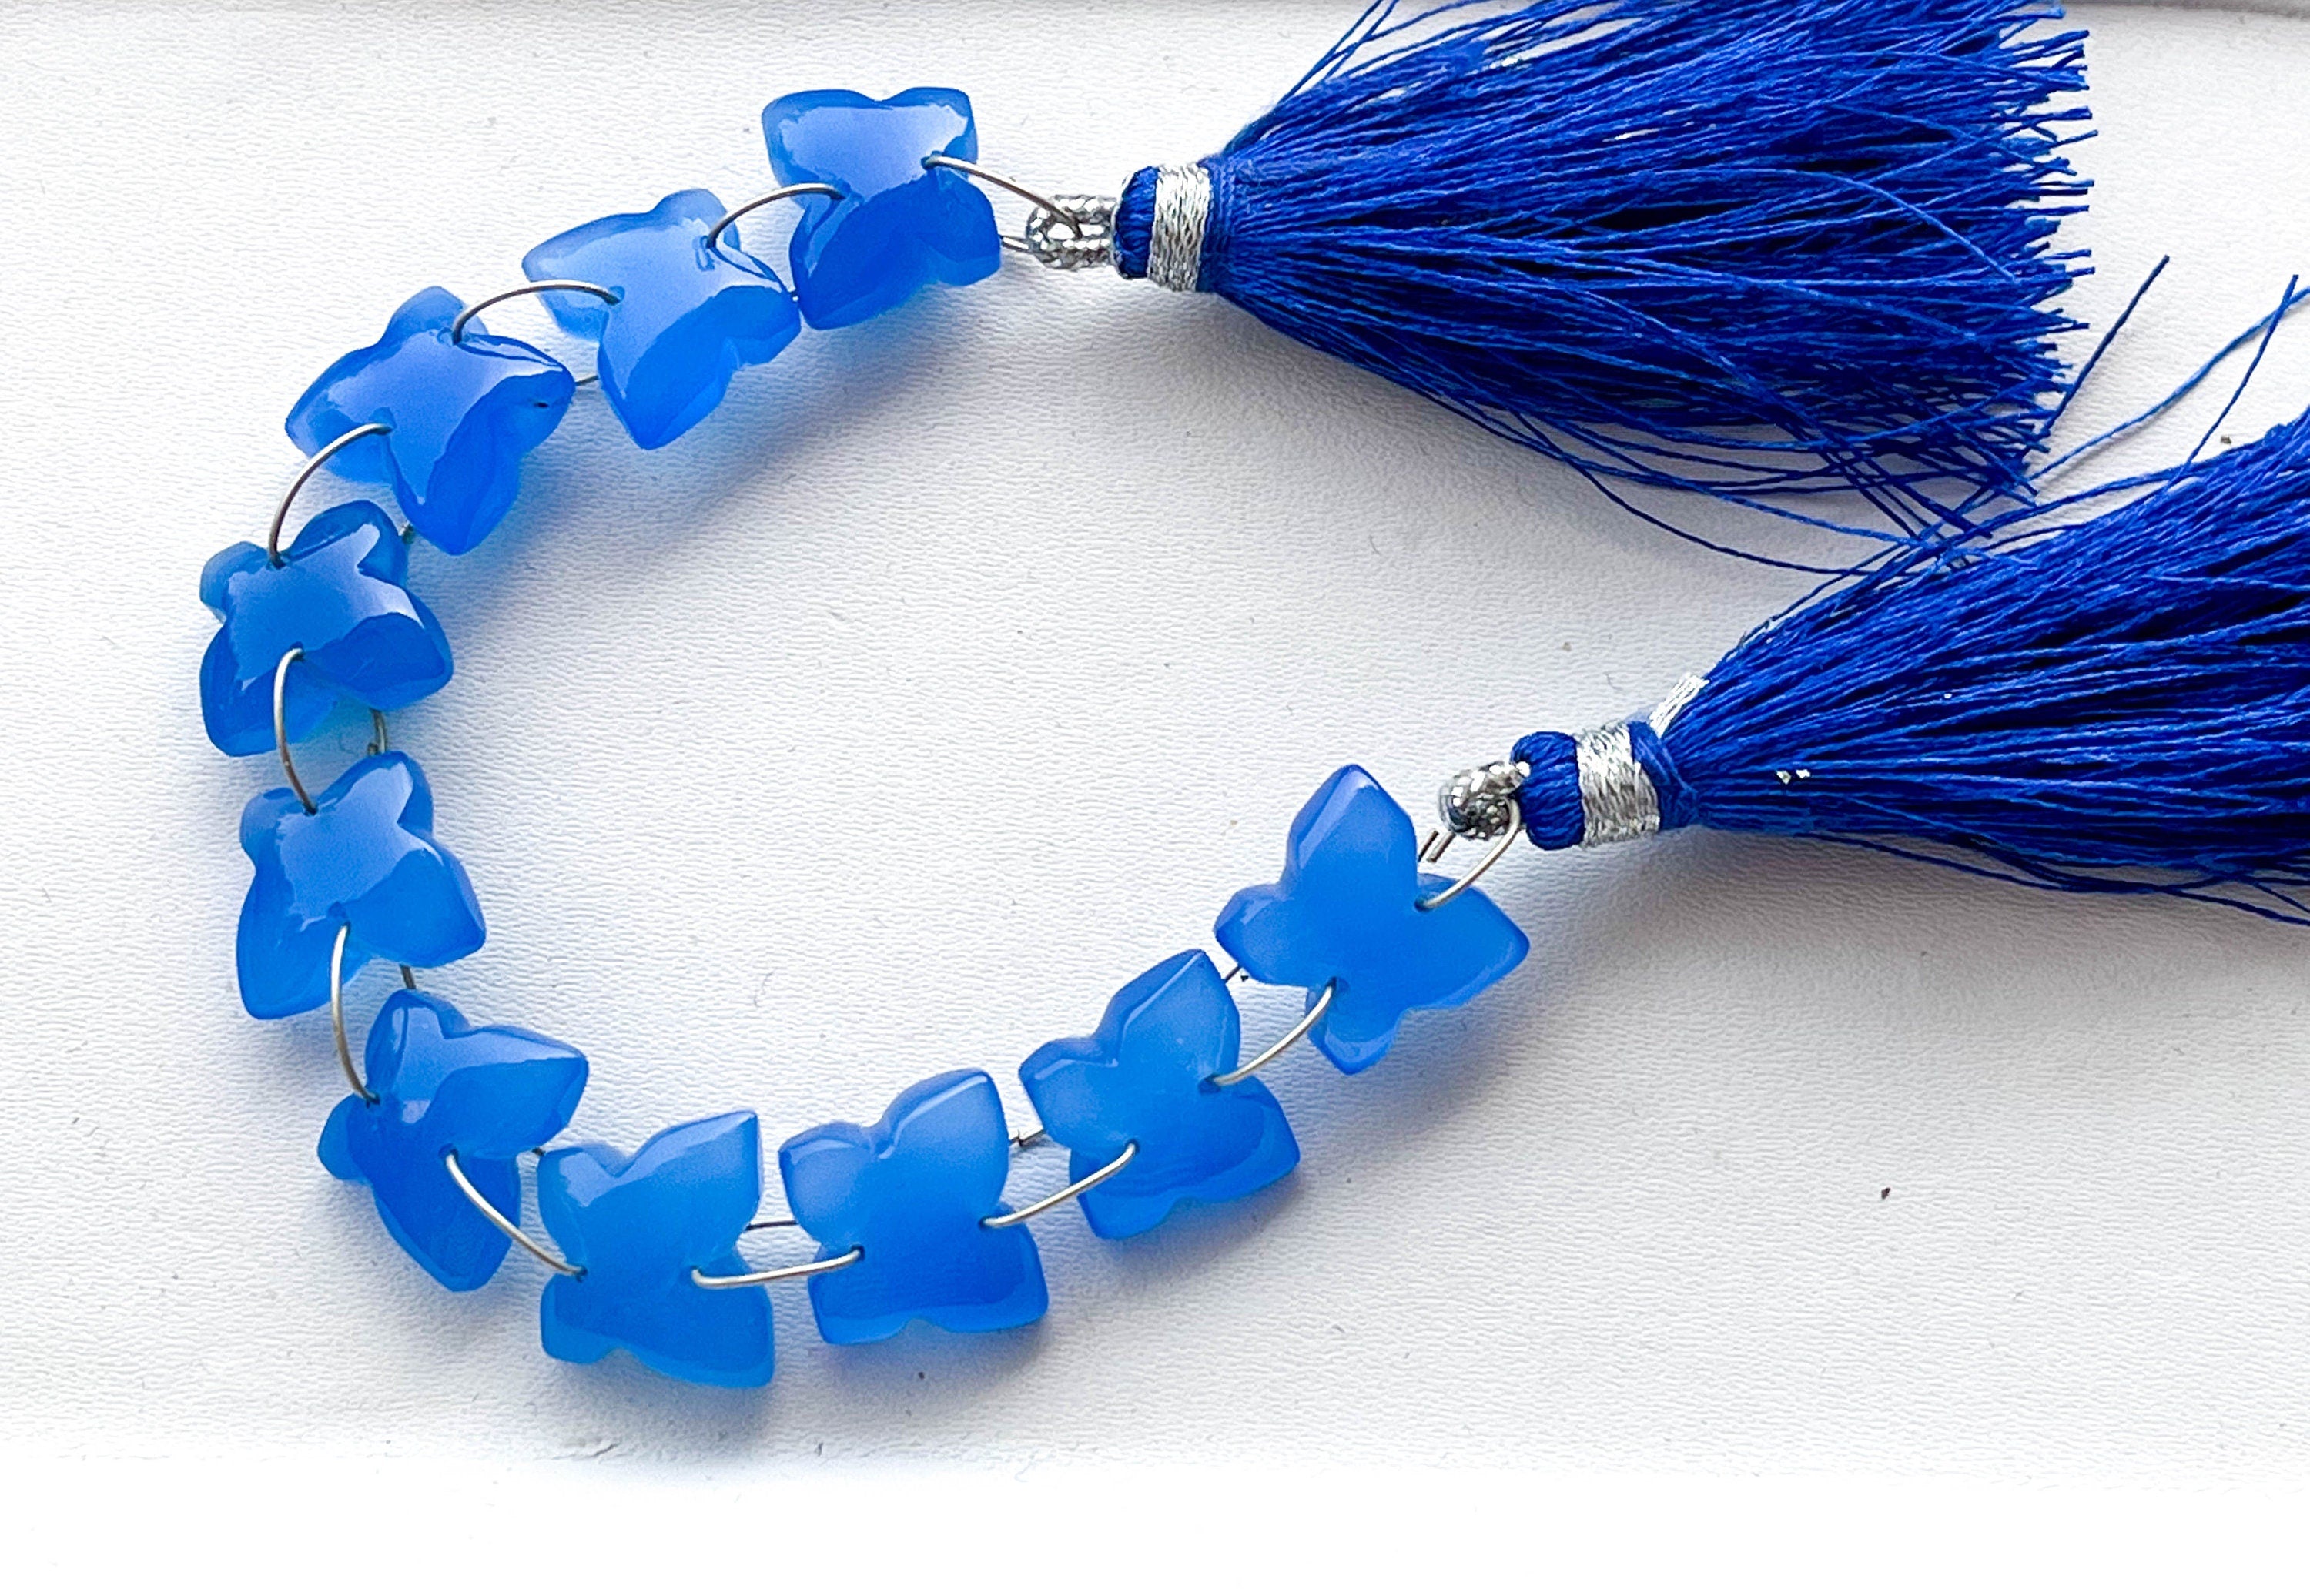 Blue Onyx Smooth Butterfly Shape Double Drill Beads, Rare Gemstone Design for Jewelry Making, 10x12mm, 10 Pieces String Beadsforyourjewelry